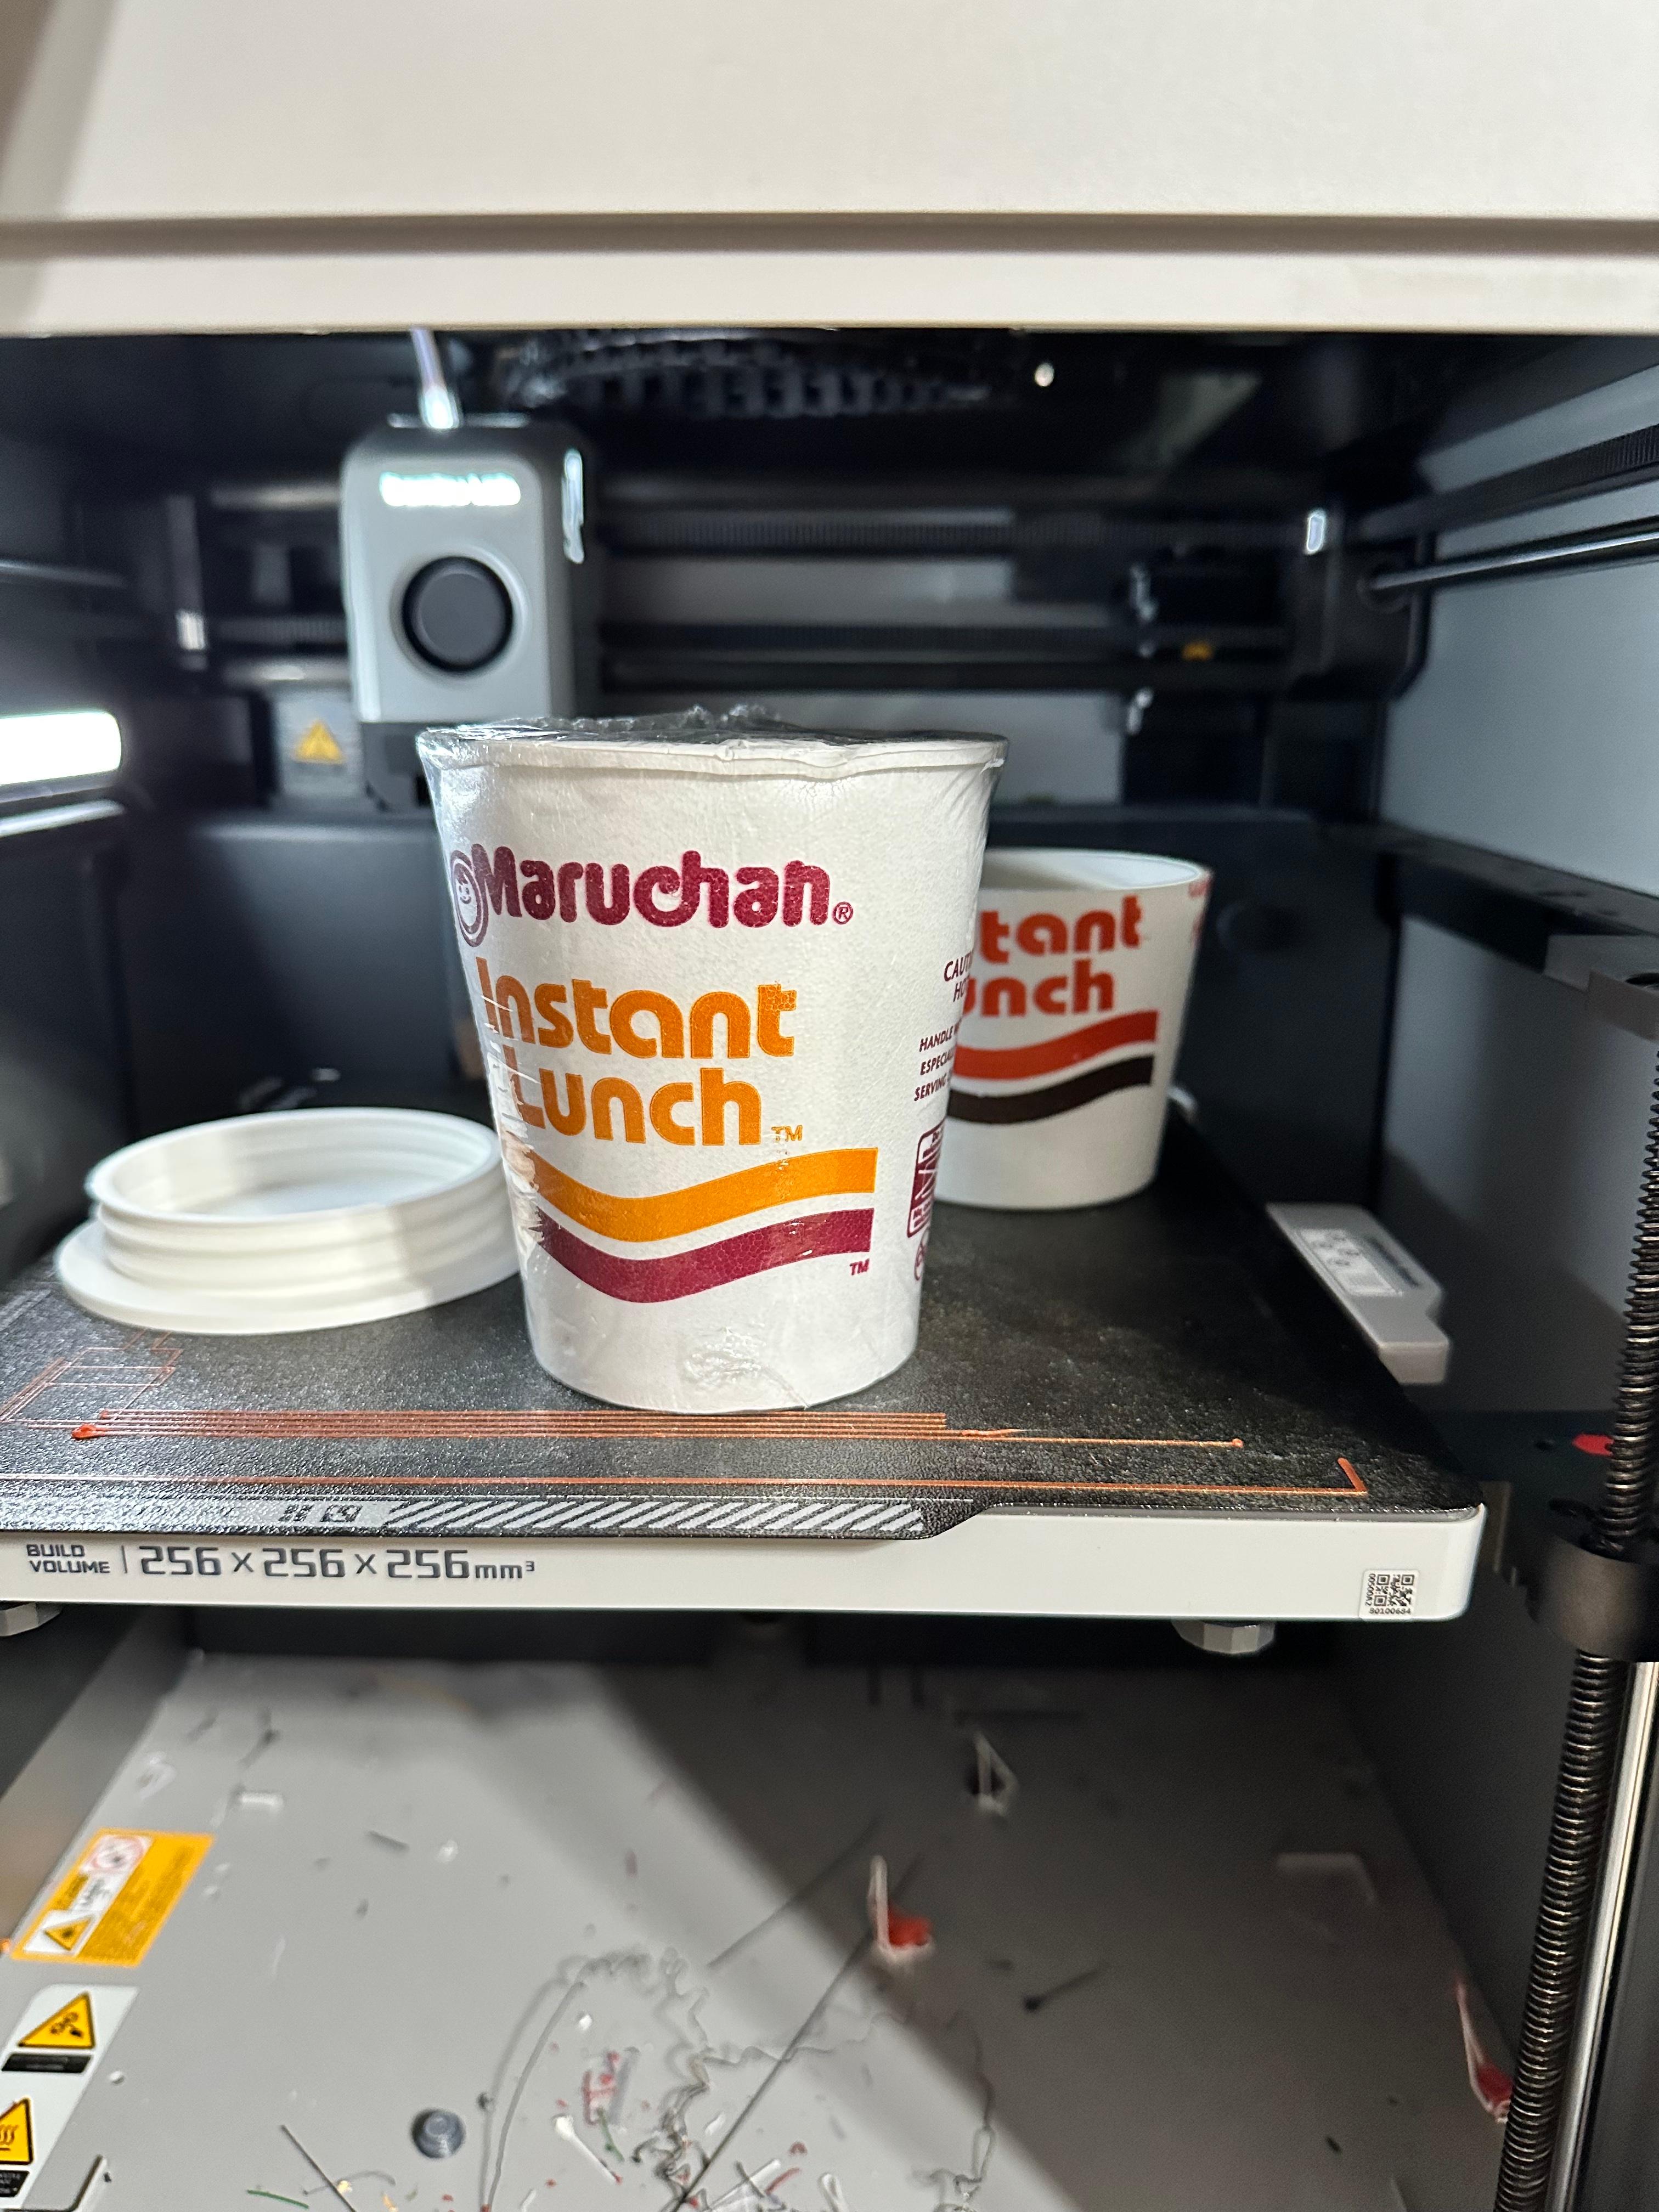 Cup O Noodles - Marachun Instant Lunch, Brand Stash Container; Hide in Plain Sight 3d model